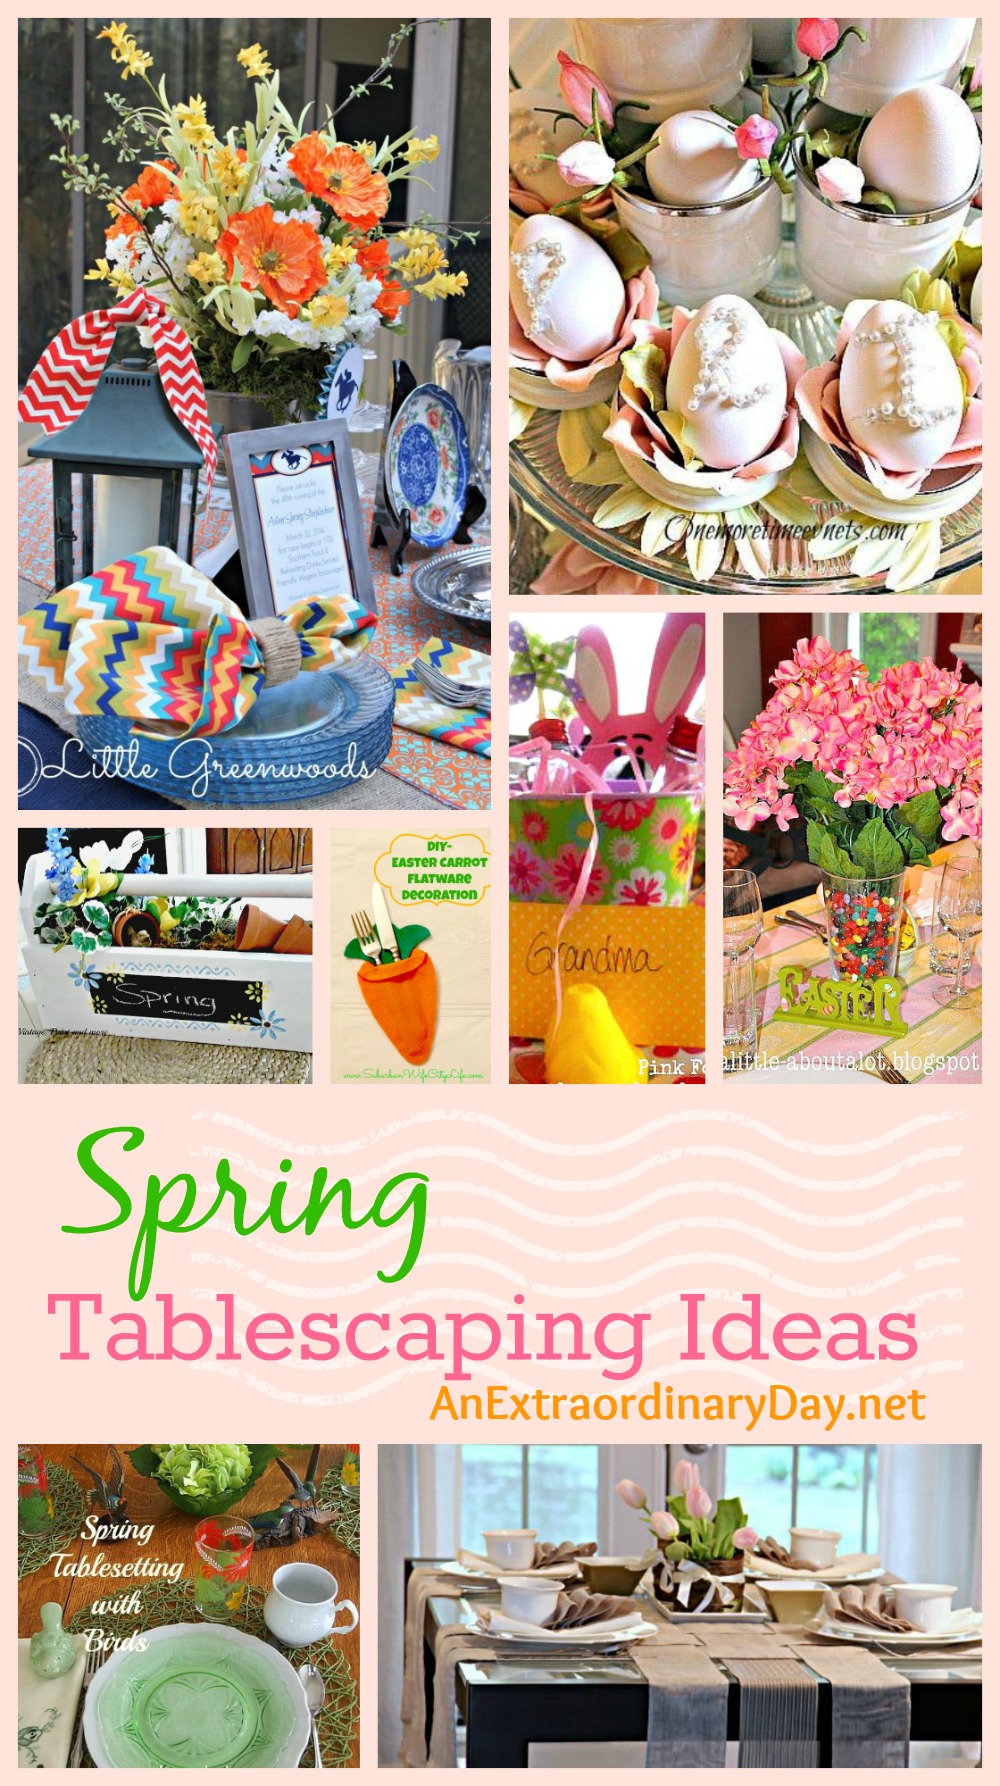 Spring Tablescaping Ideas :: Project Inspired Features 3-31 ::  AnExtraordinaryDay.net